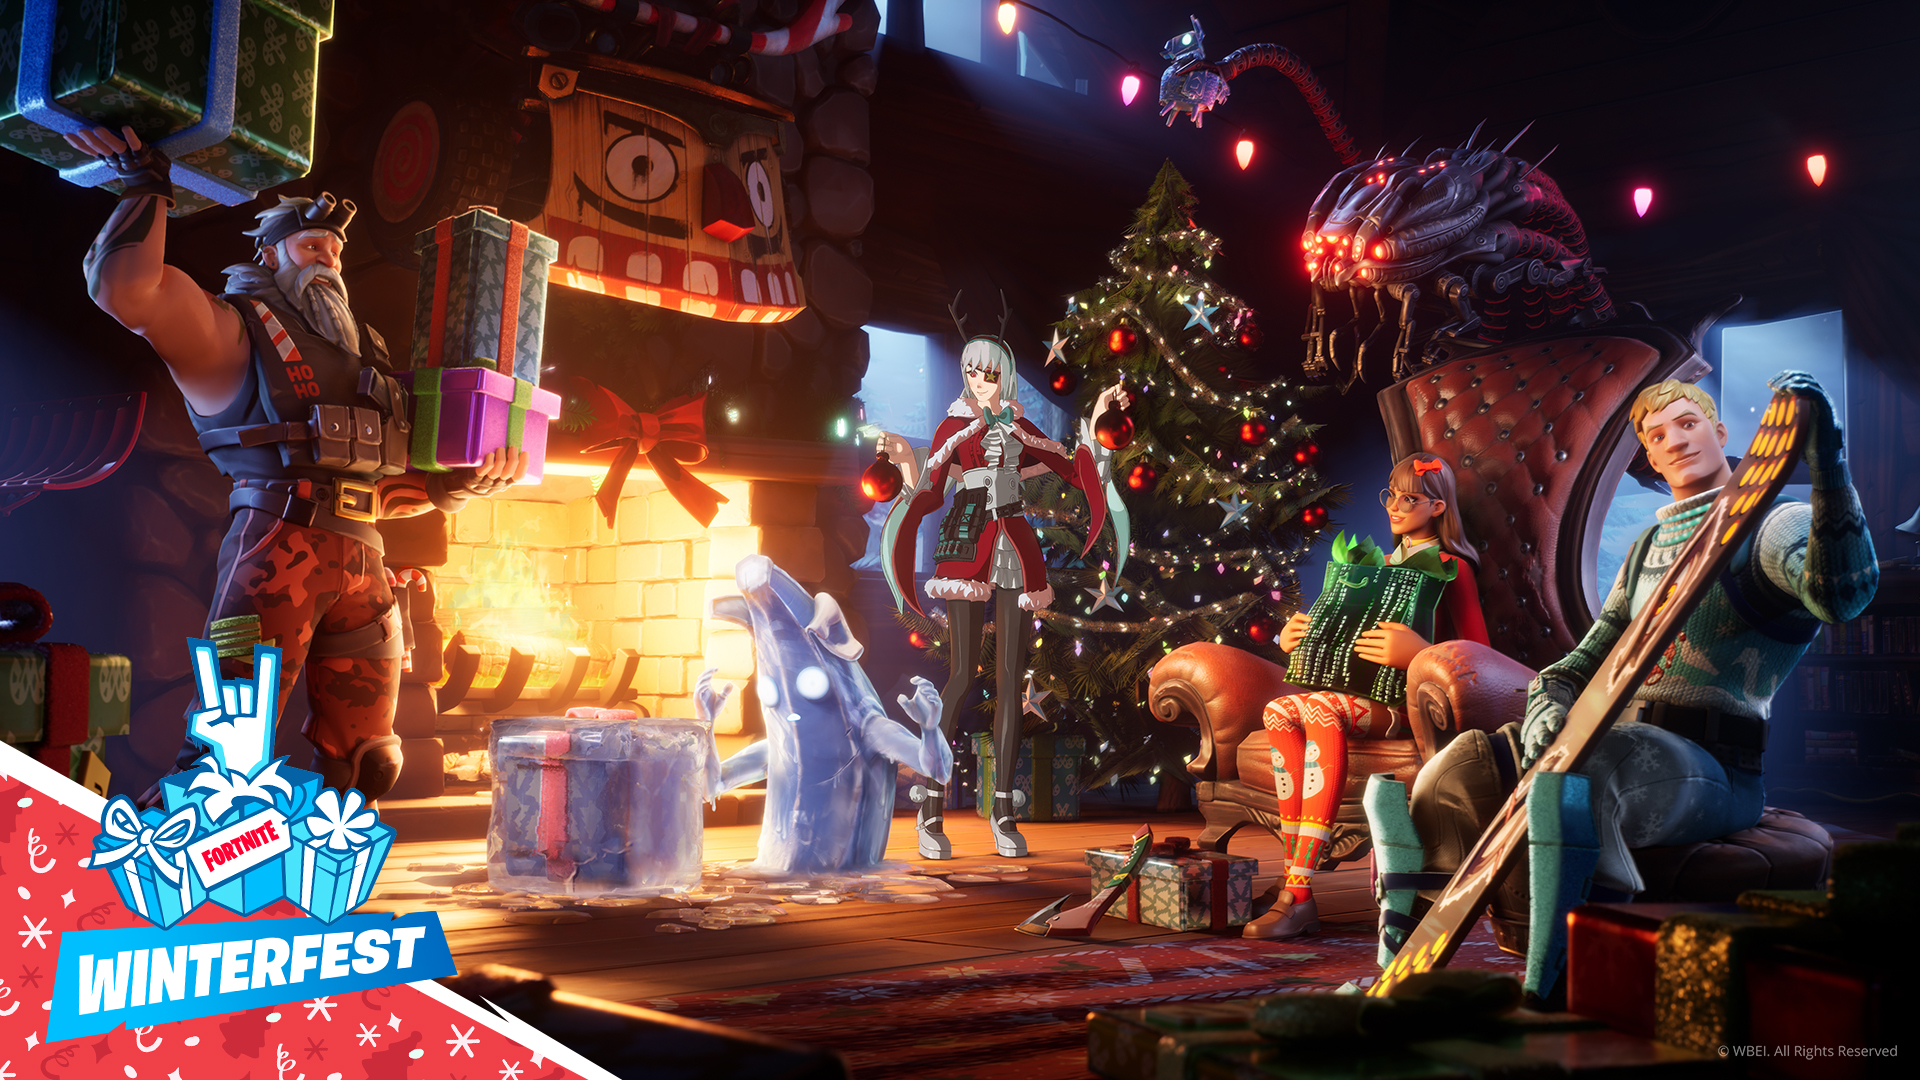 Fortnite Winterfest Lodge with characters resting by a log fire surrounded by presents and Christmas decorations.